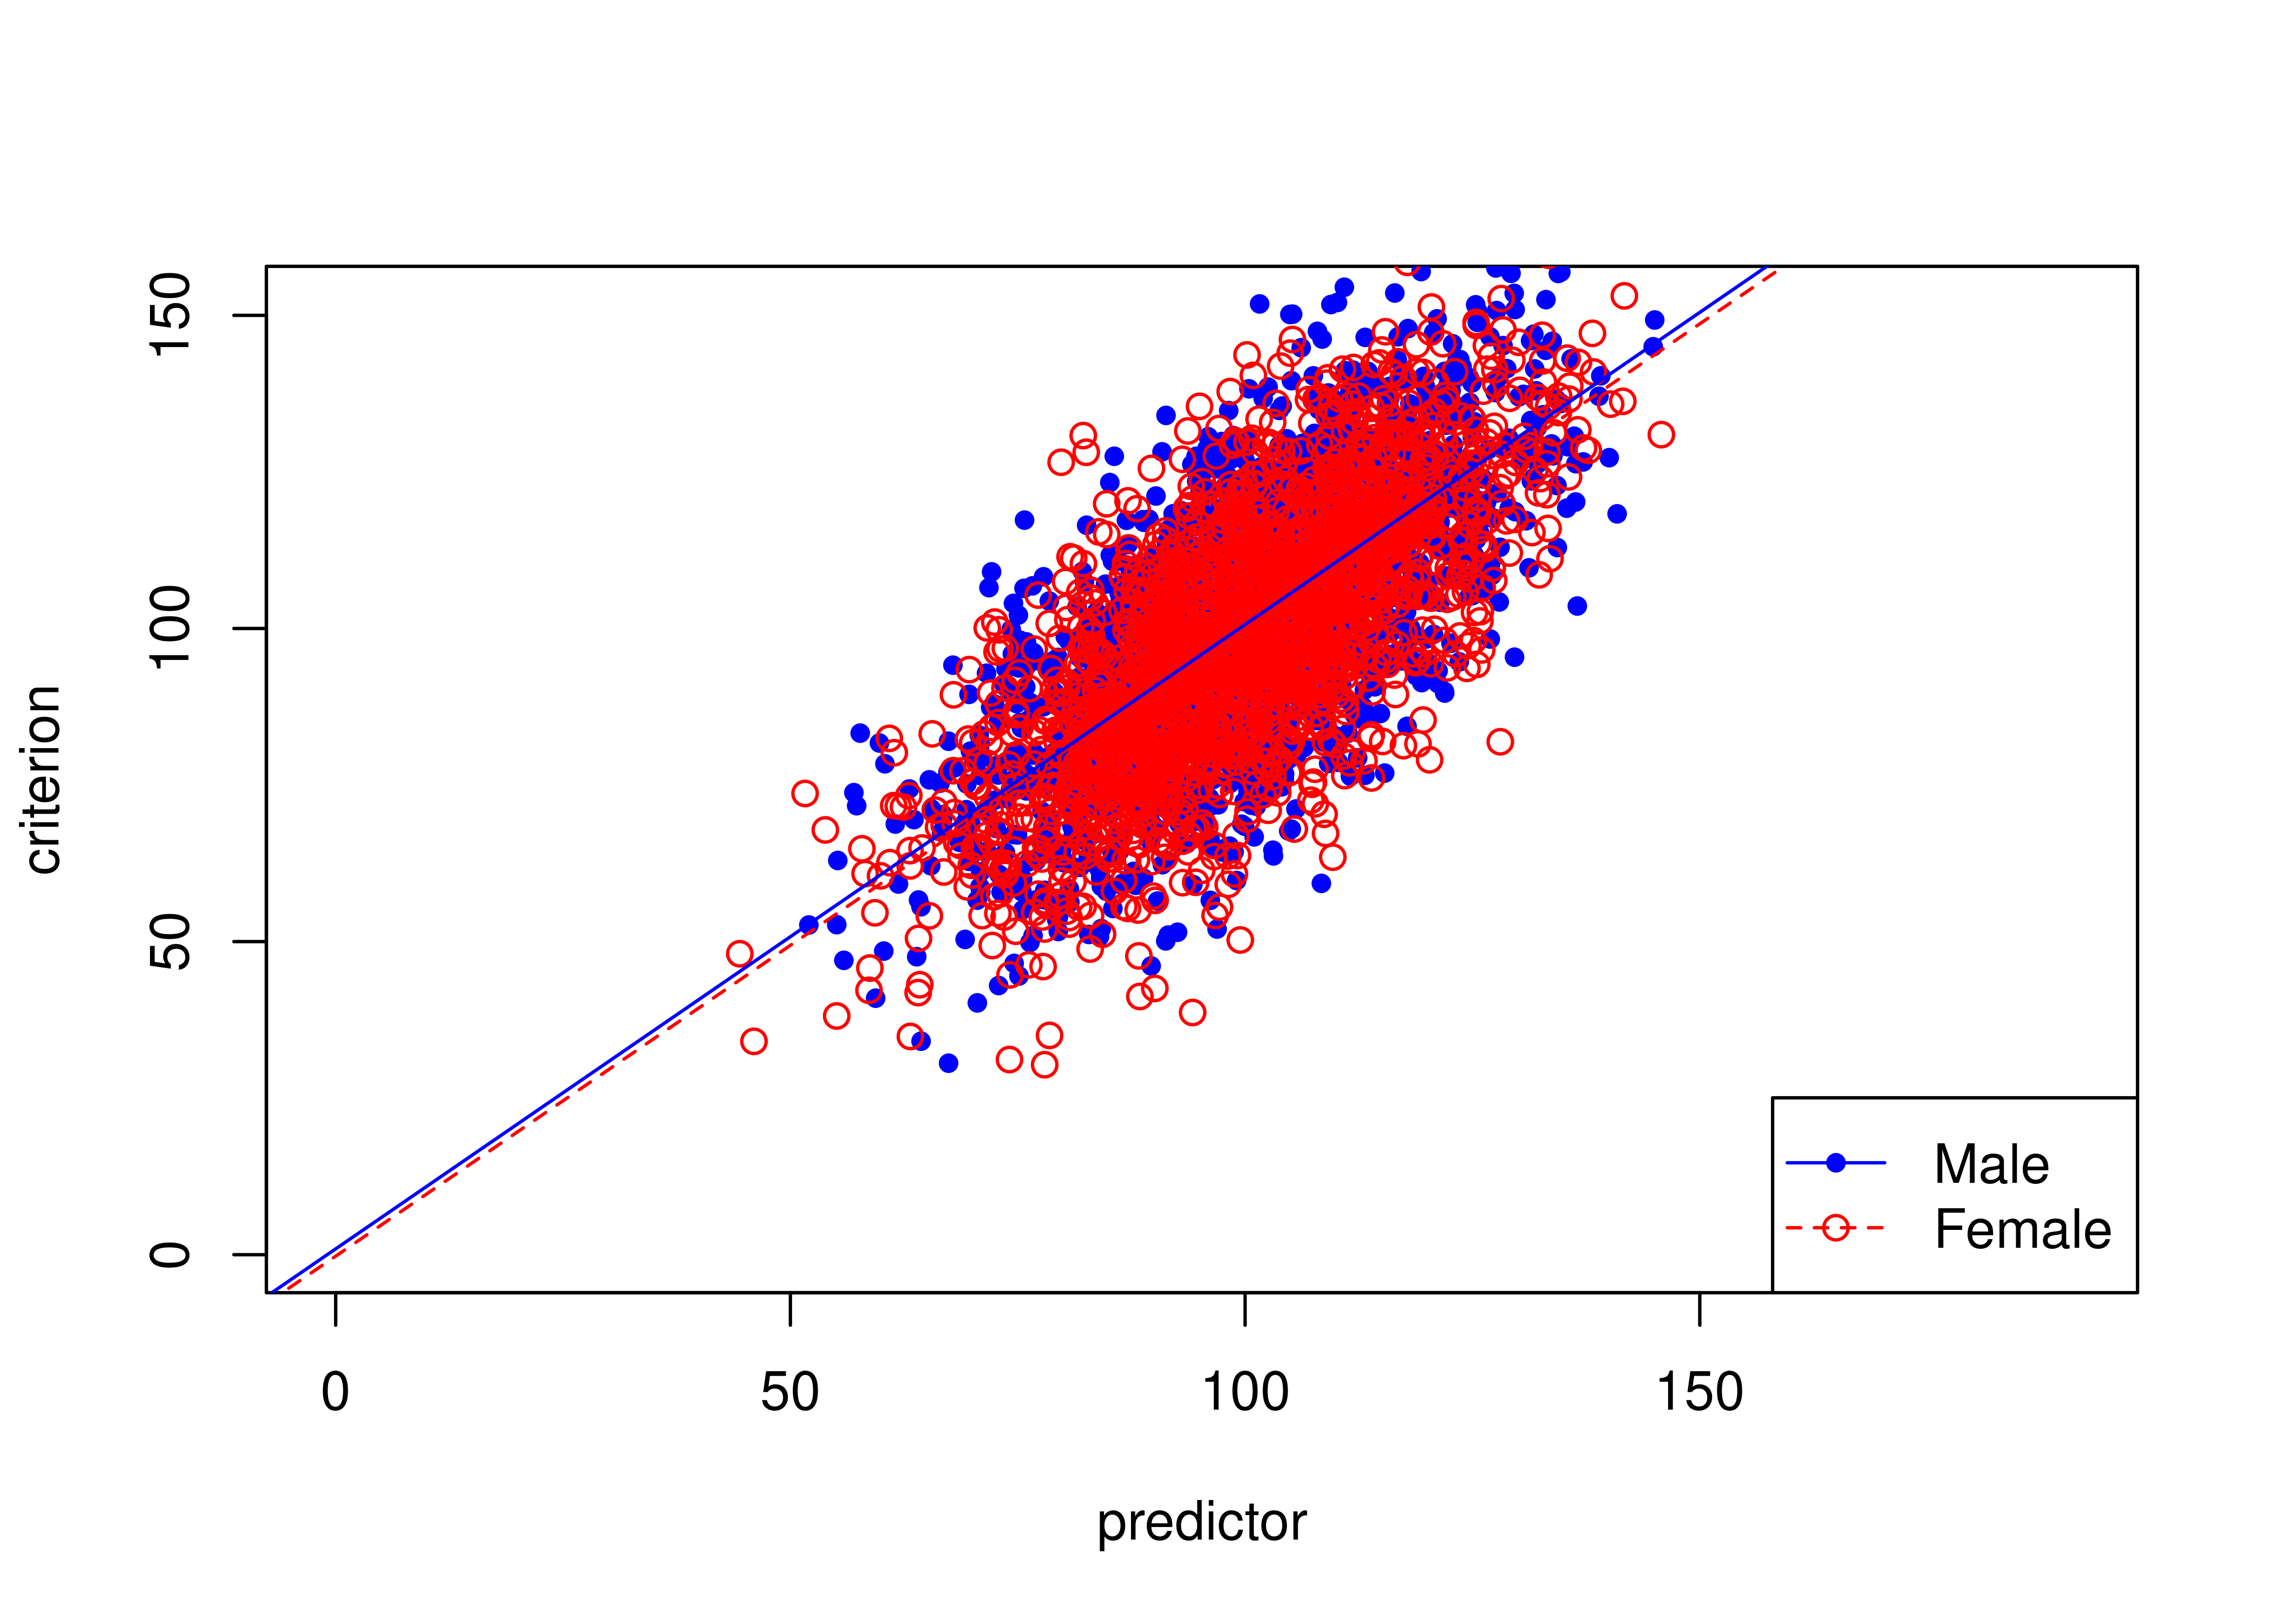 Unbiased Test Where Males and Females Have Equal Means on Predictor and Criterion.